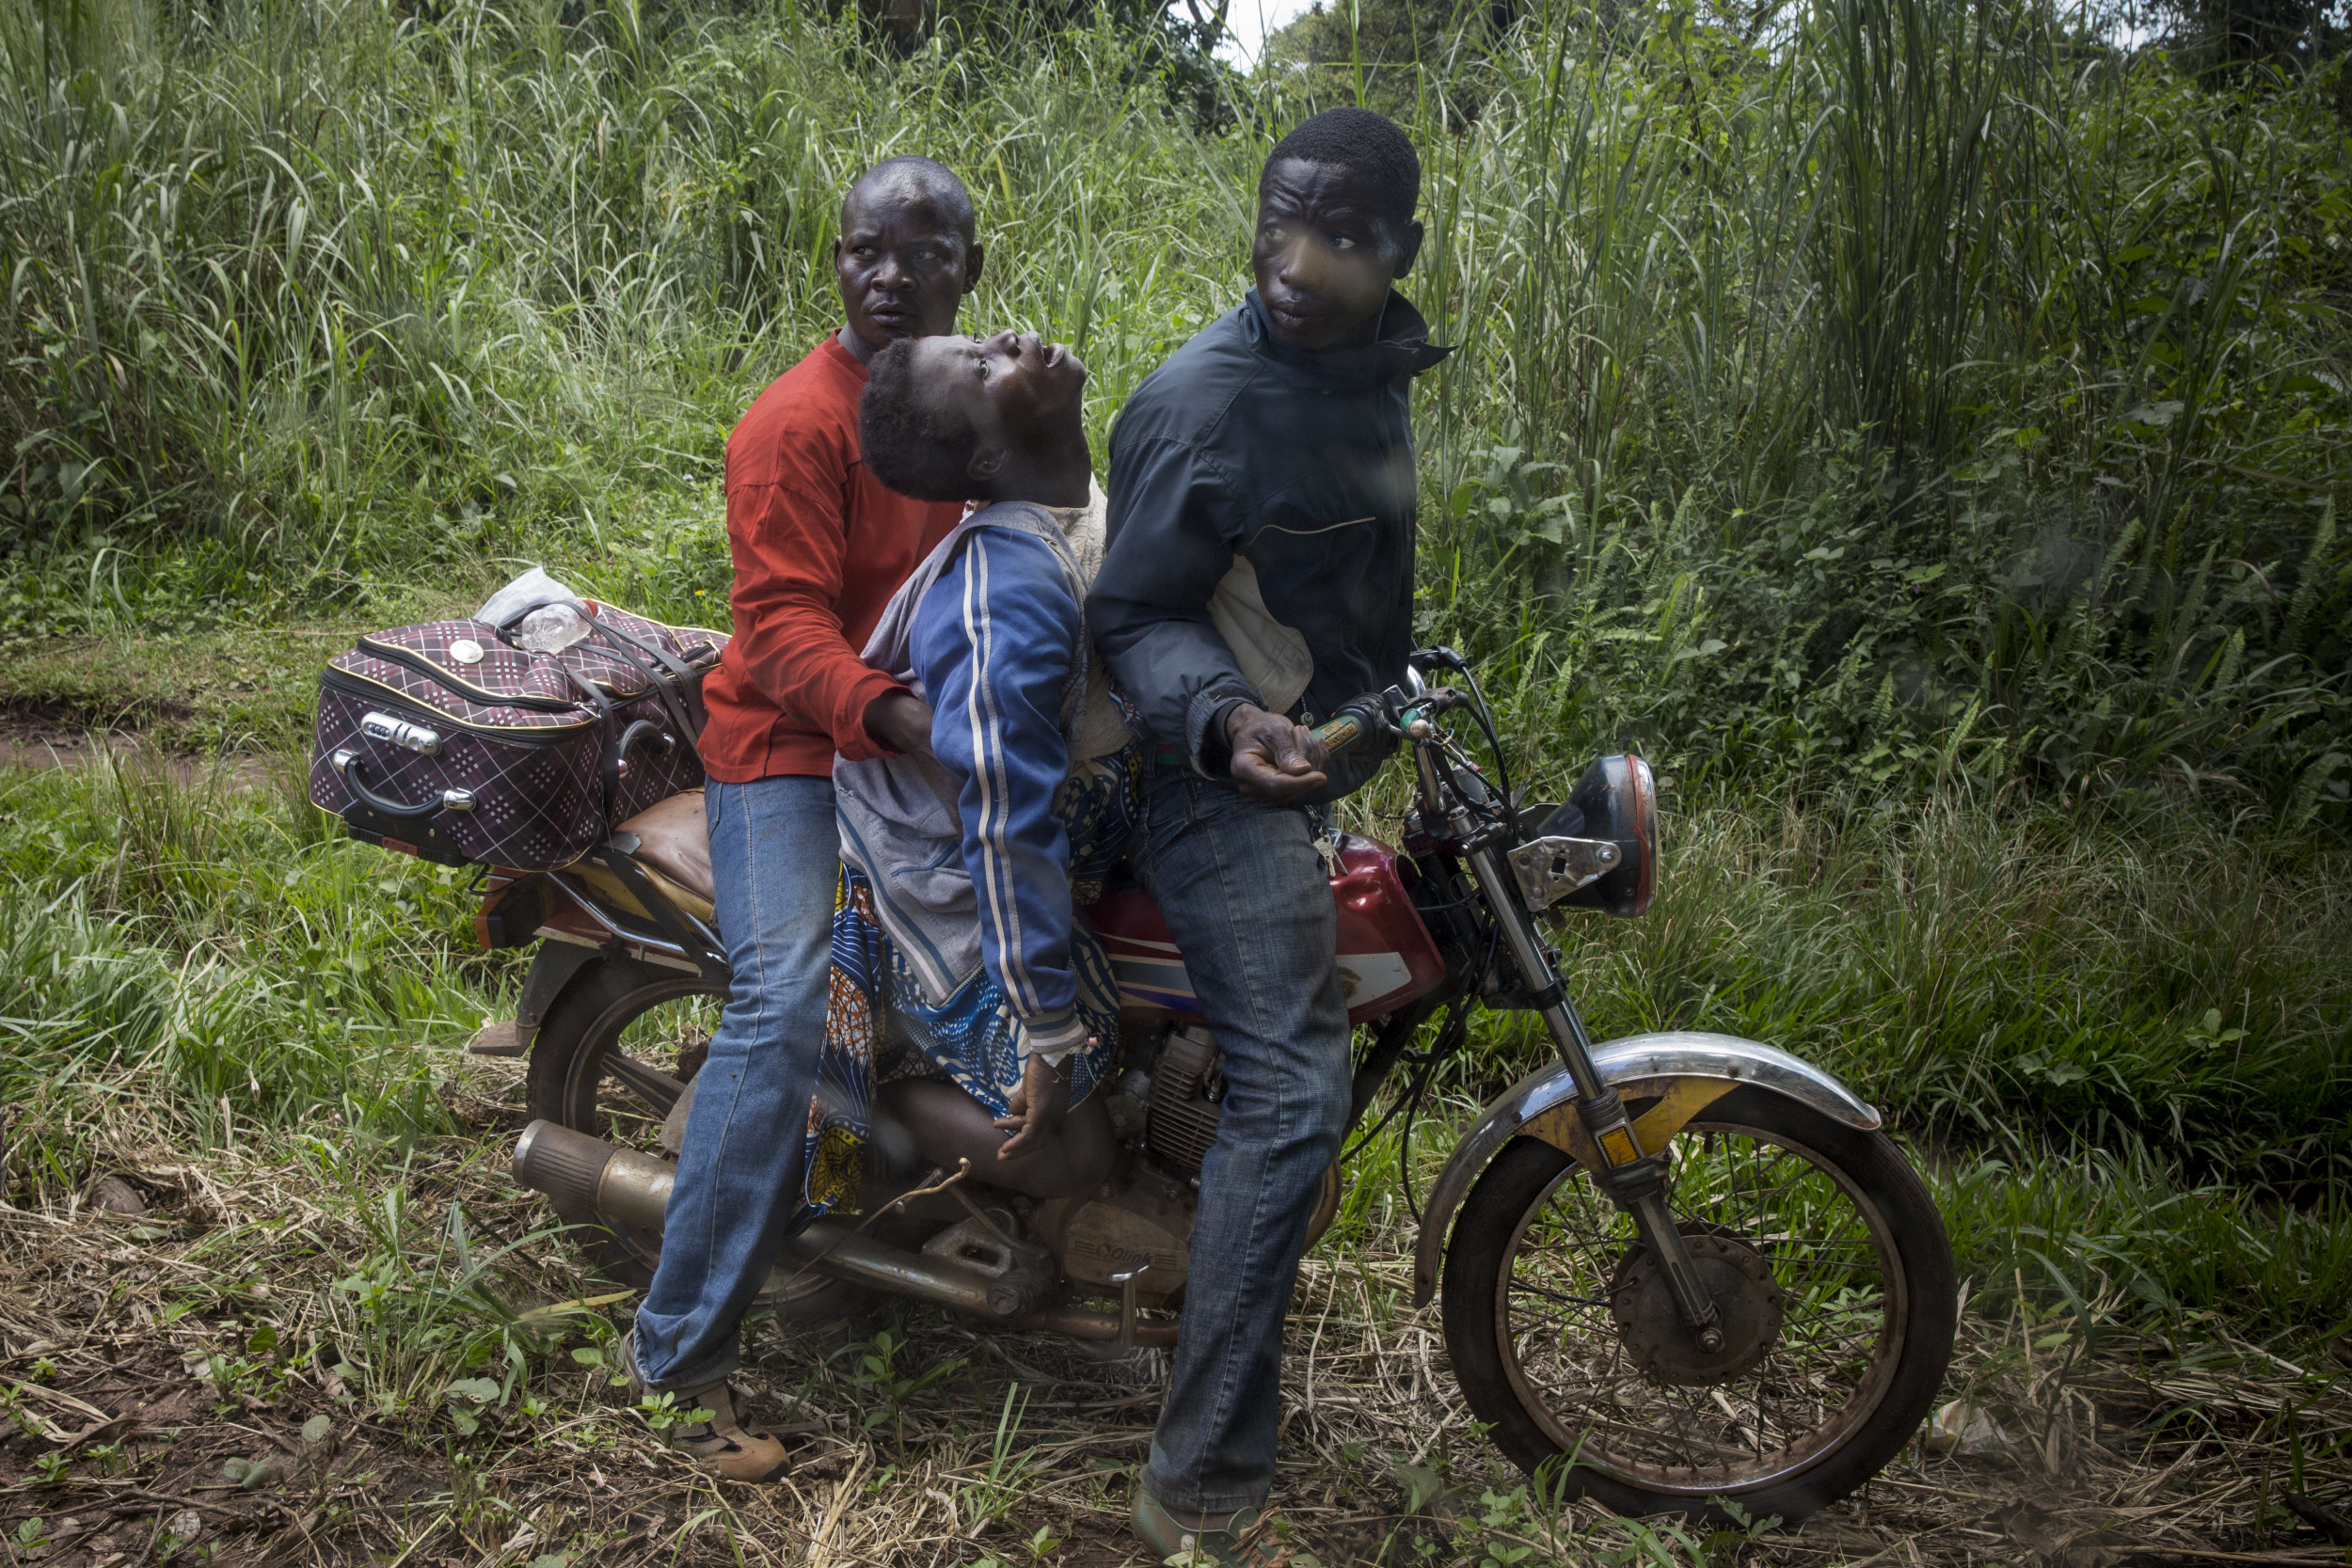 A woman suffering complications from pregnancy traveled for two hours on a motorbike from her village before a team from Doctors Without Borders took her to the hospital in Berberati, Central African Republic, Oct. 14, 2015.